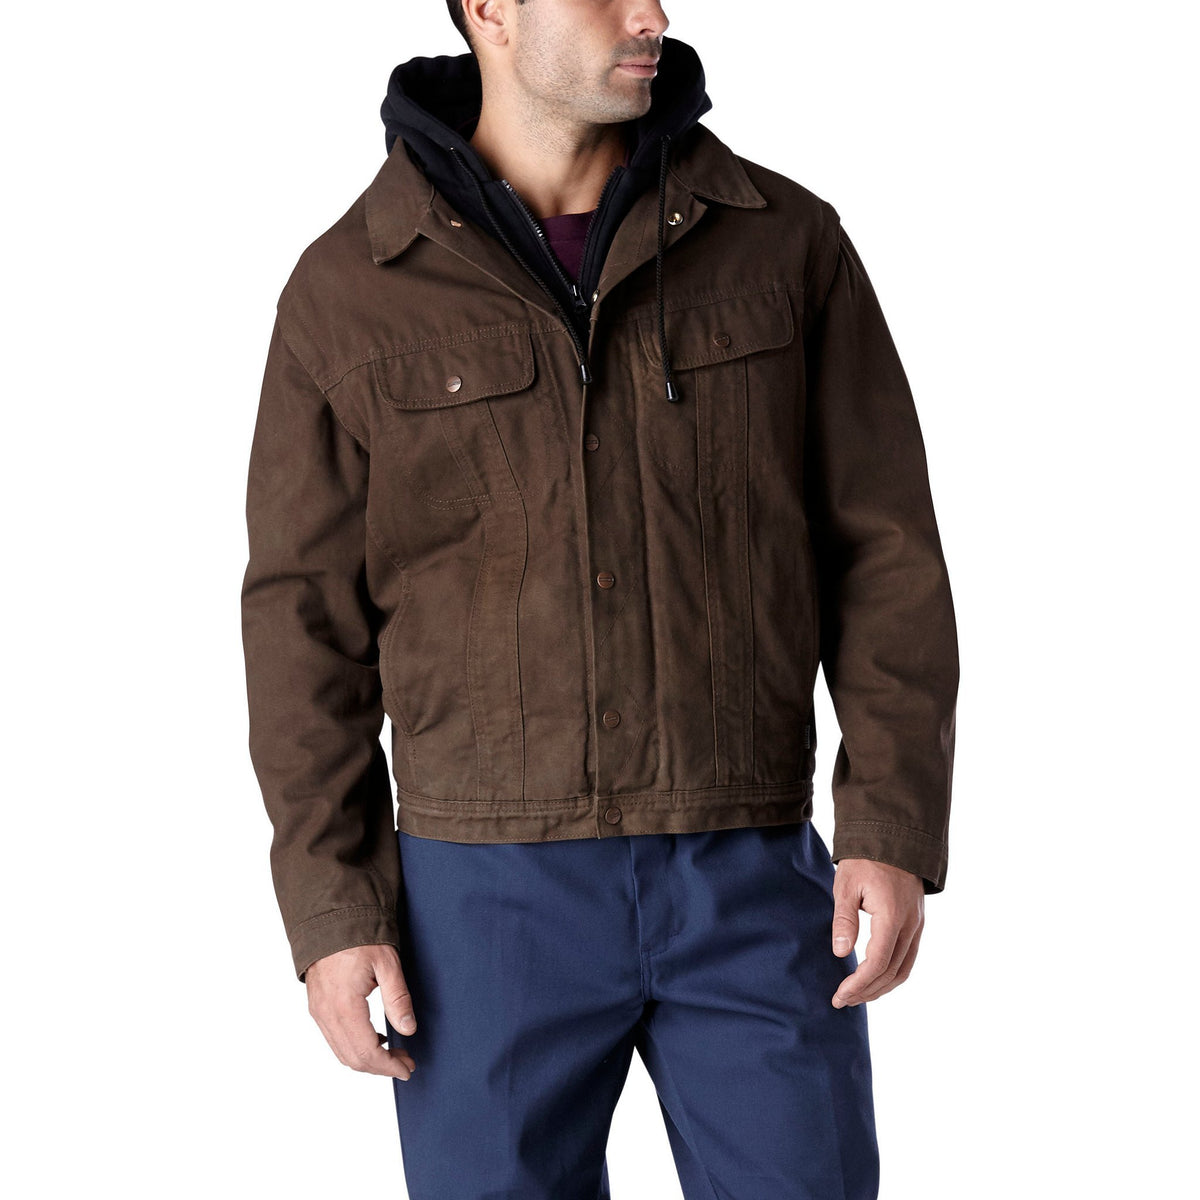 Men's 2 In 1 Convertible Hooded Work Jacket And Vest - Chestnut | Mark's